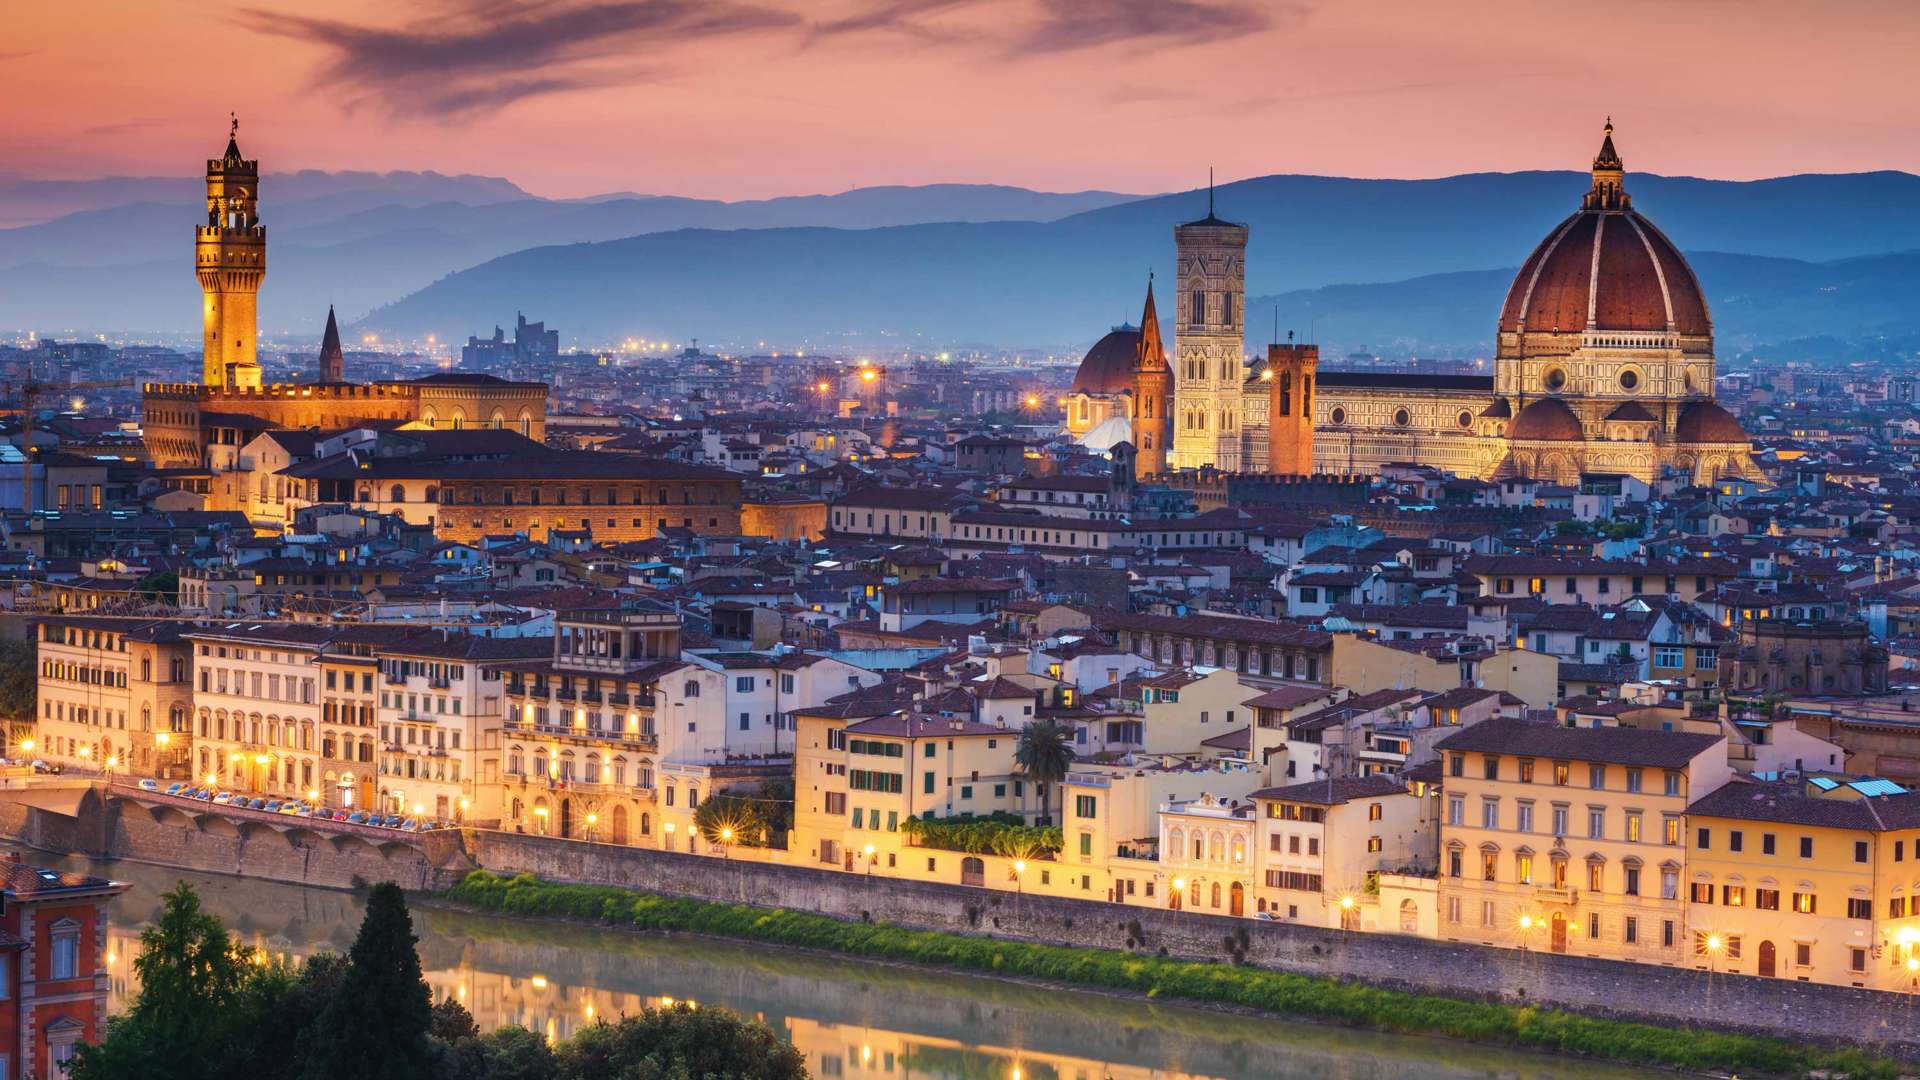 View of Florence with the Duomo in the evening, Florence, Italy